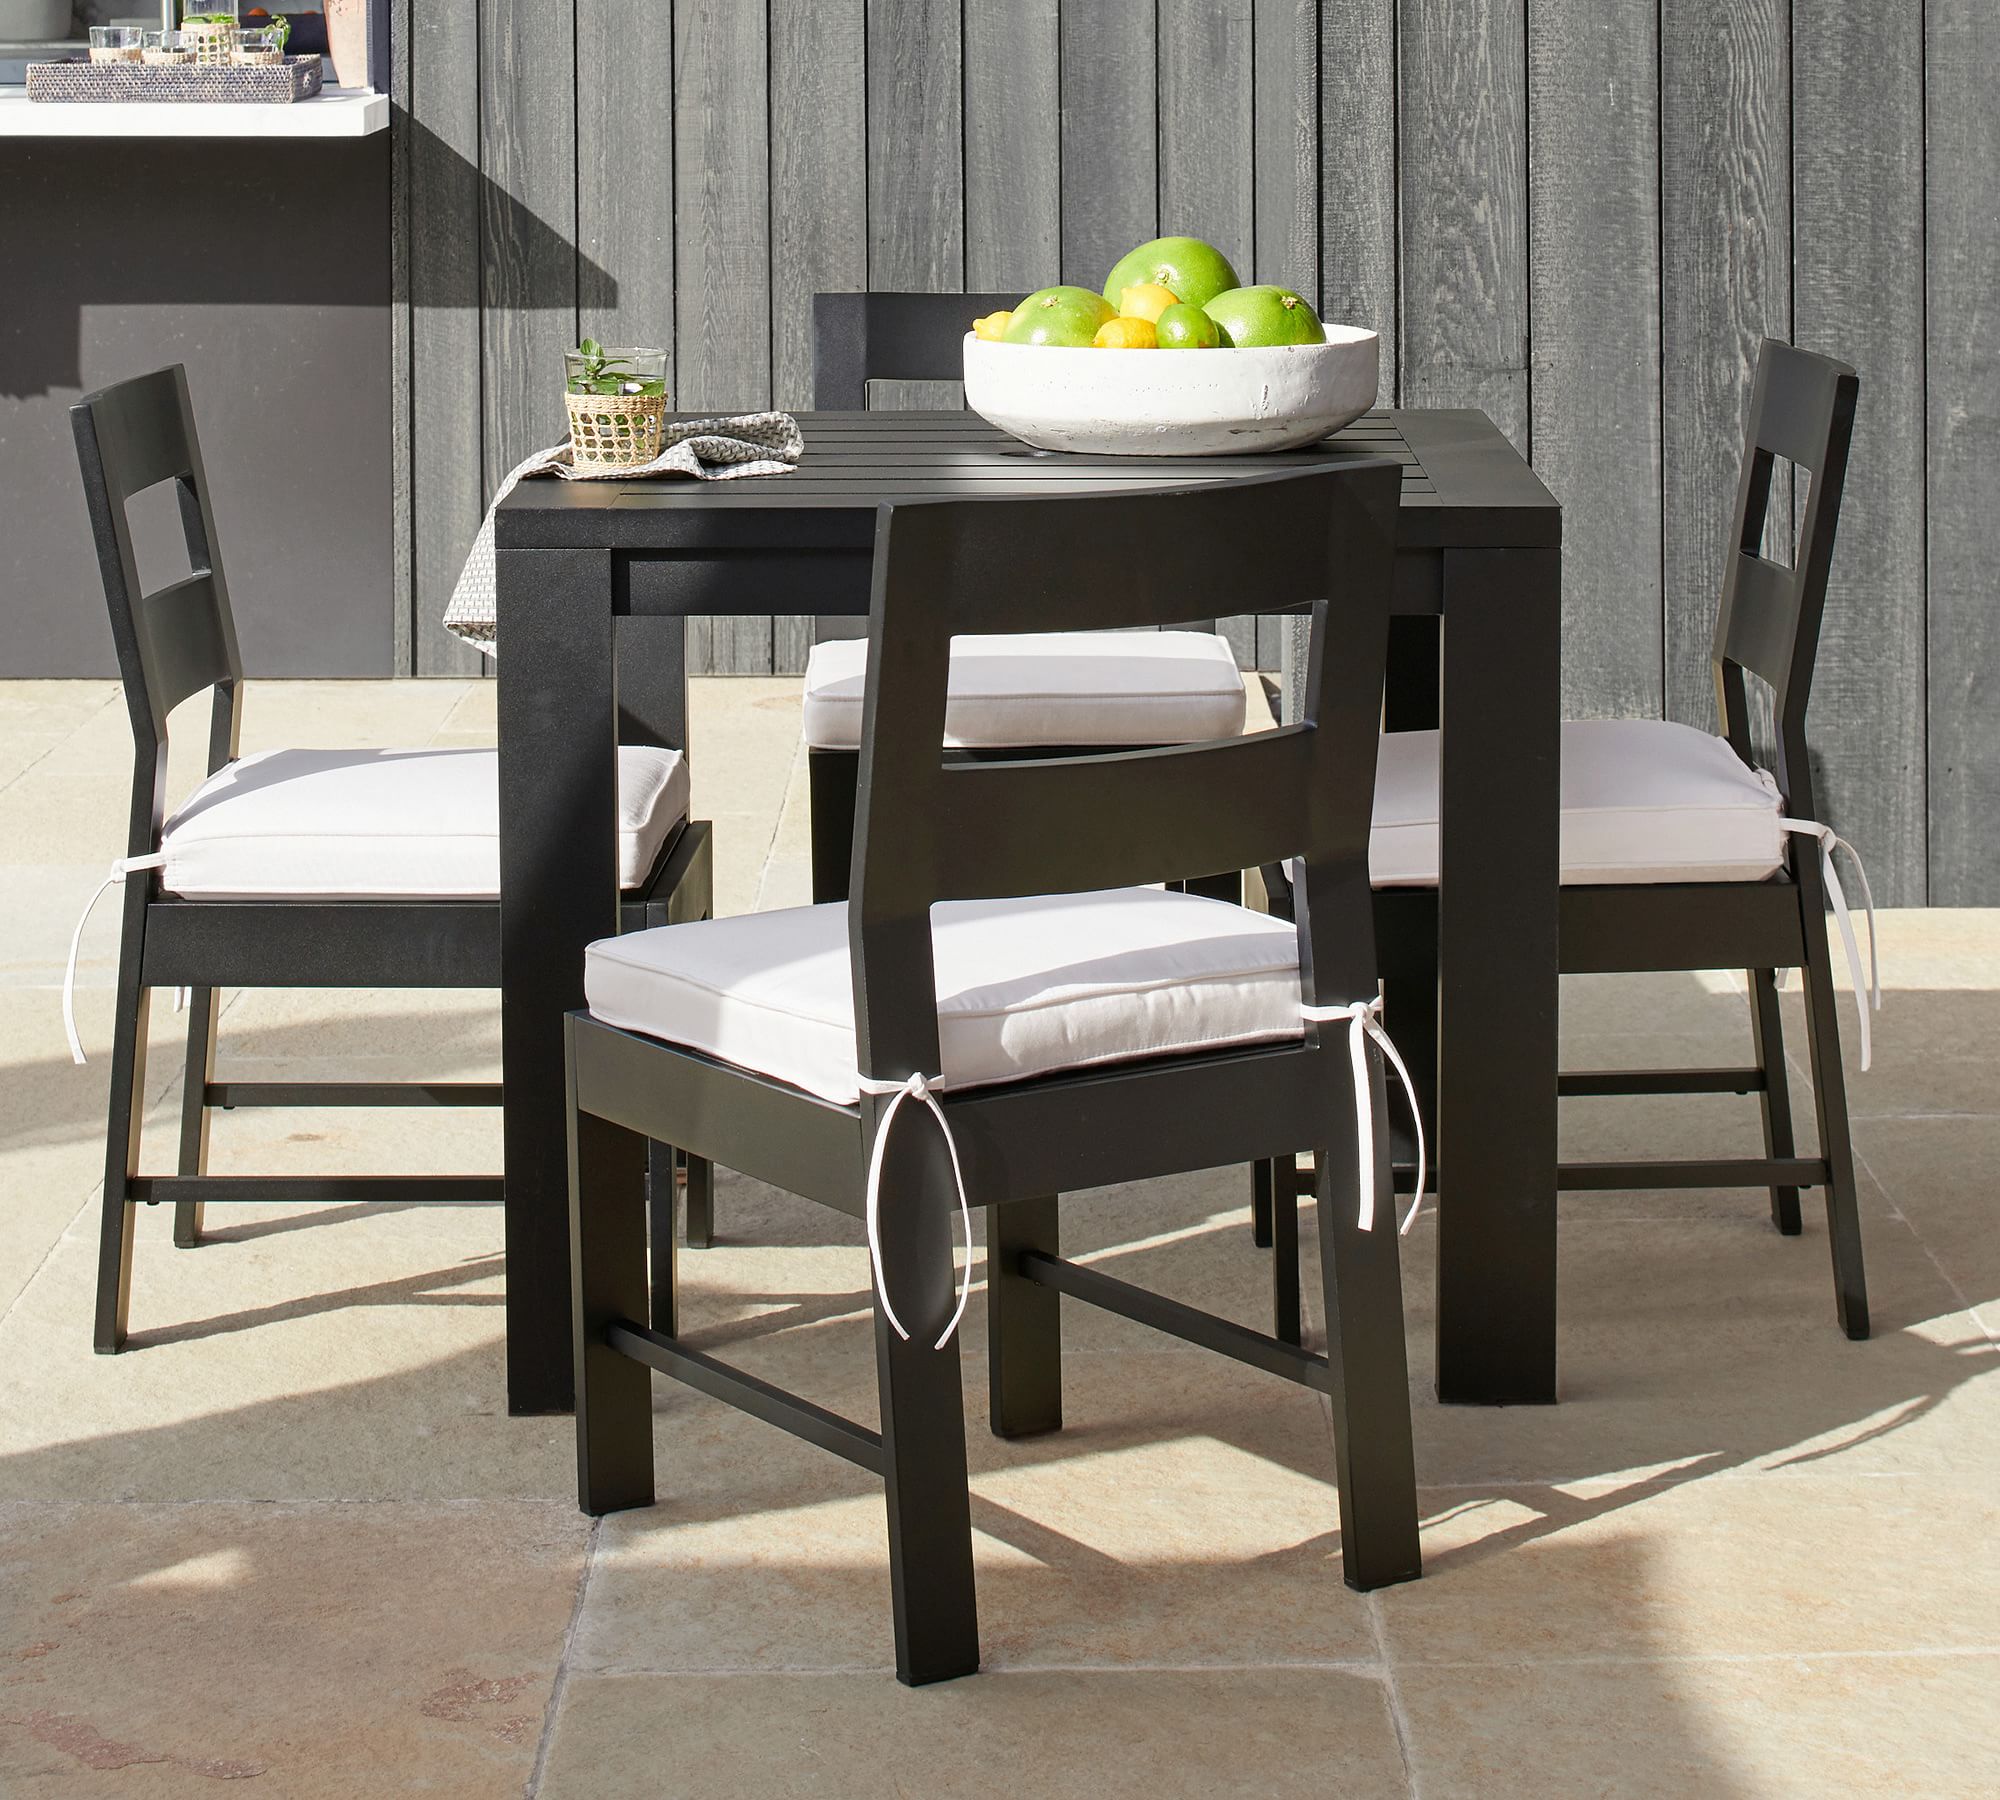 Malibu Metal Square Outdoor Dining Table (36")